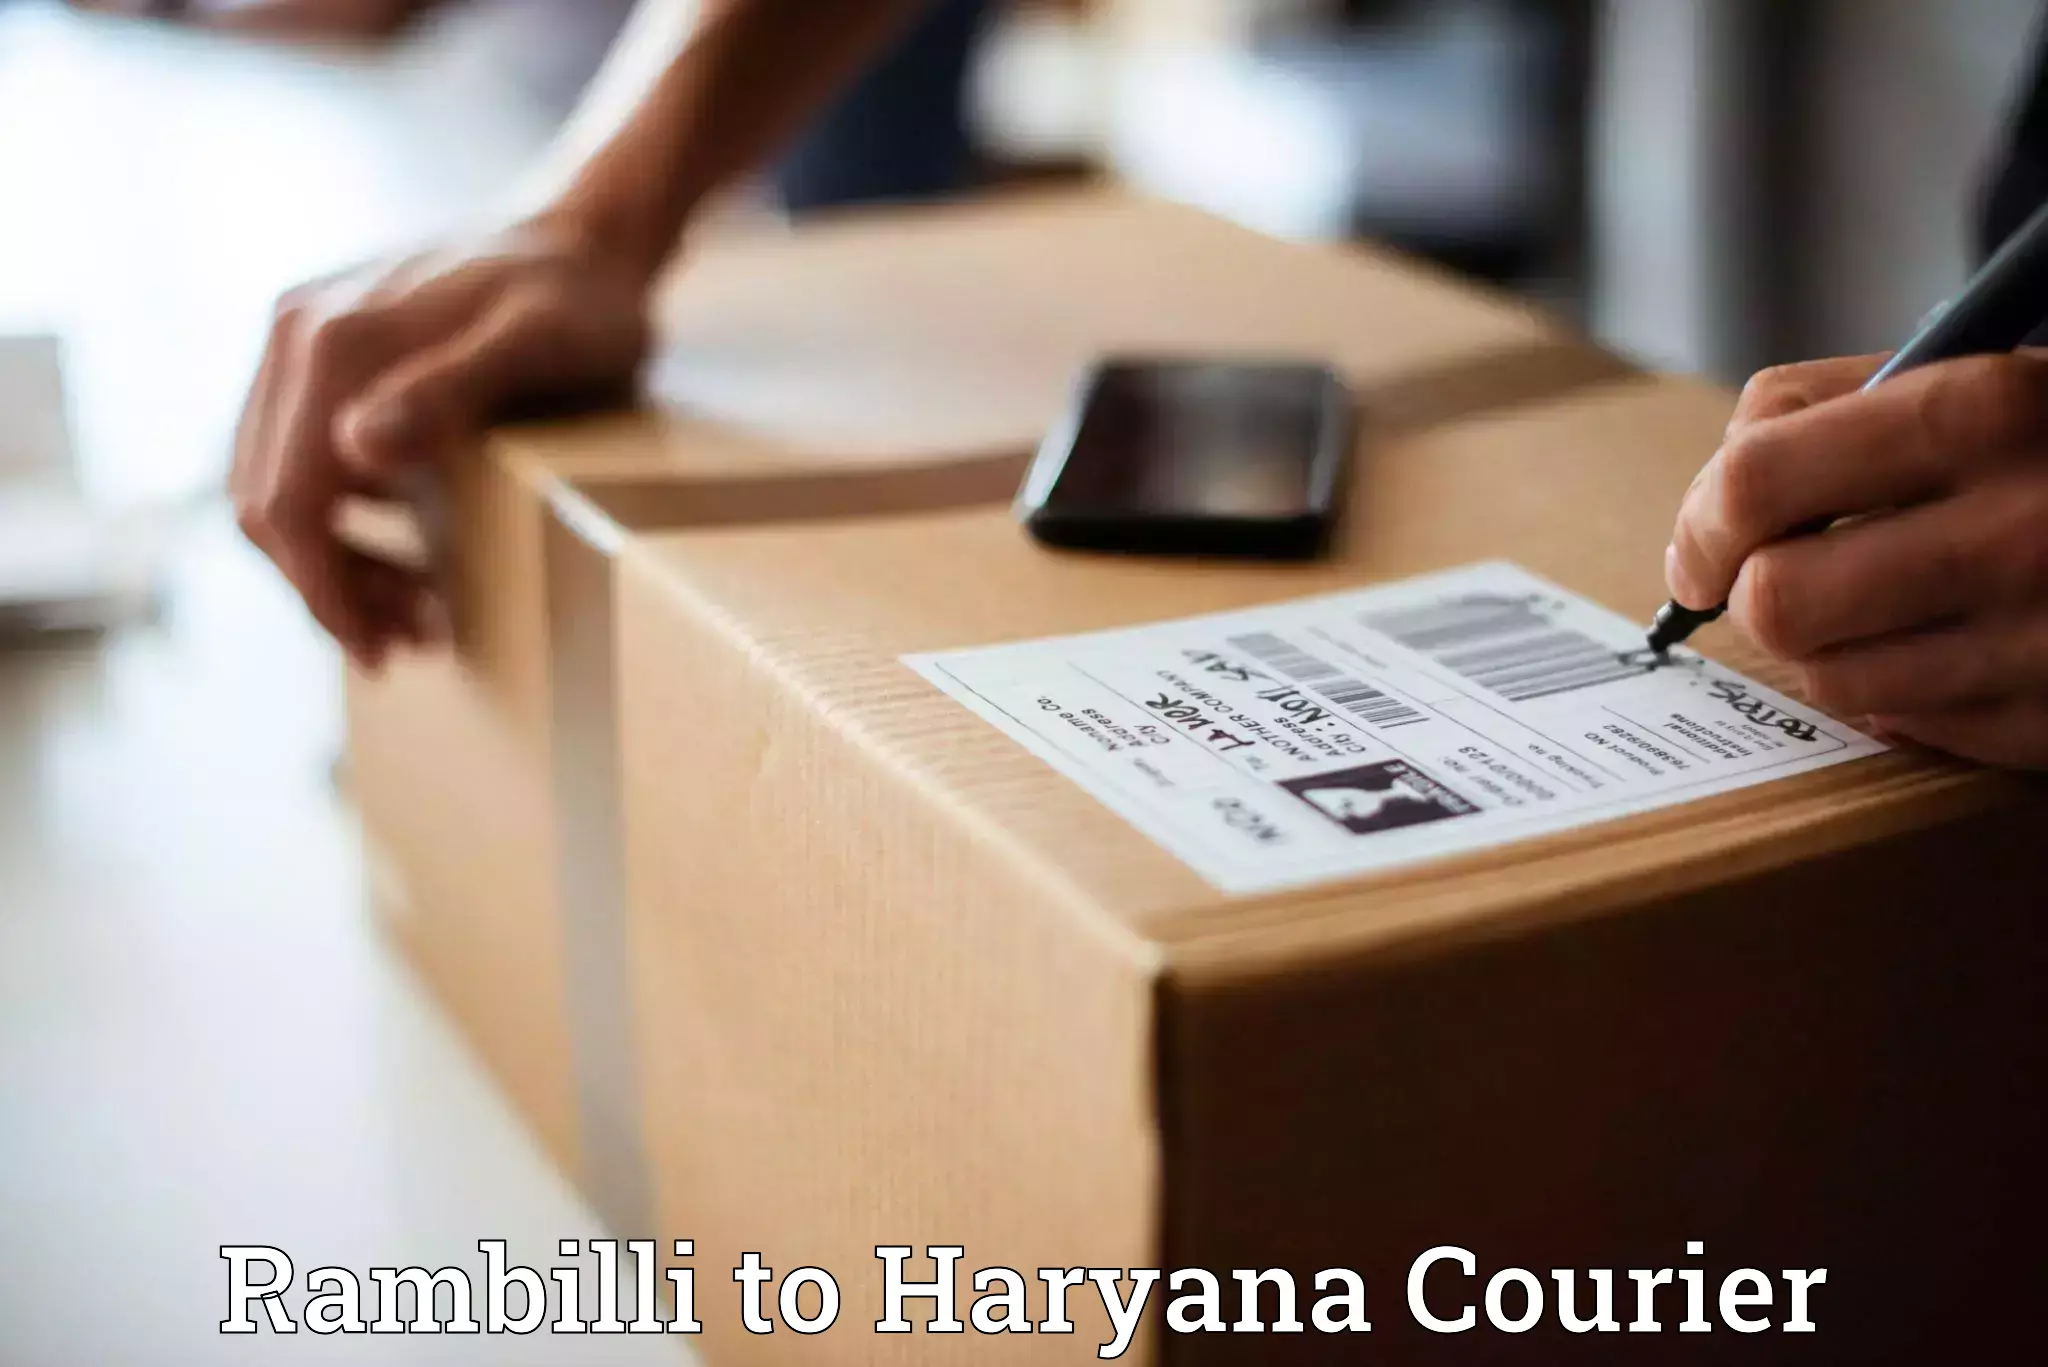 Personal courier services Rambilli to Chaudhary Charan Singh Haryana Agricultural University Hisar